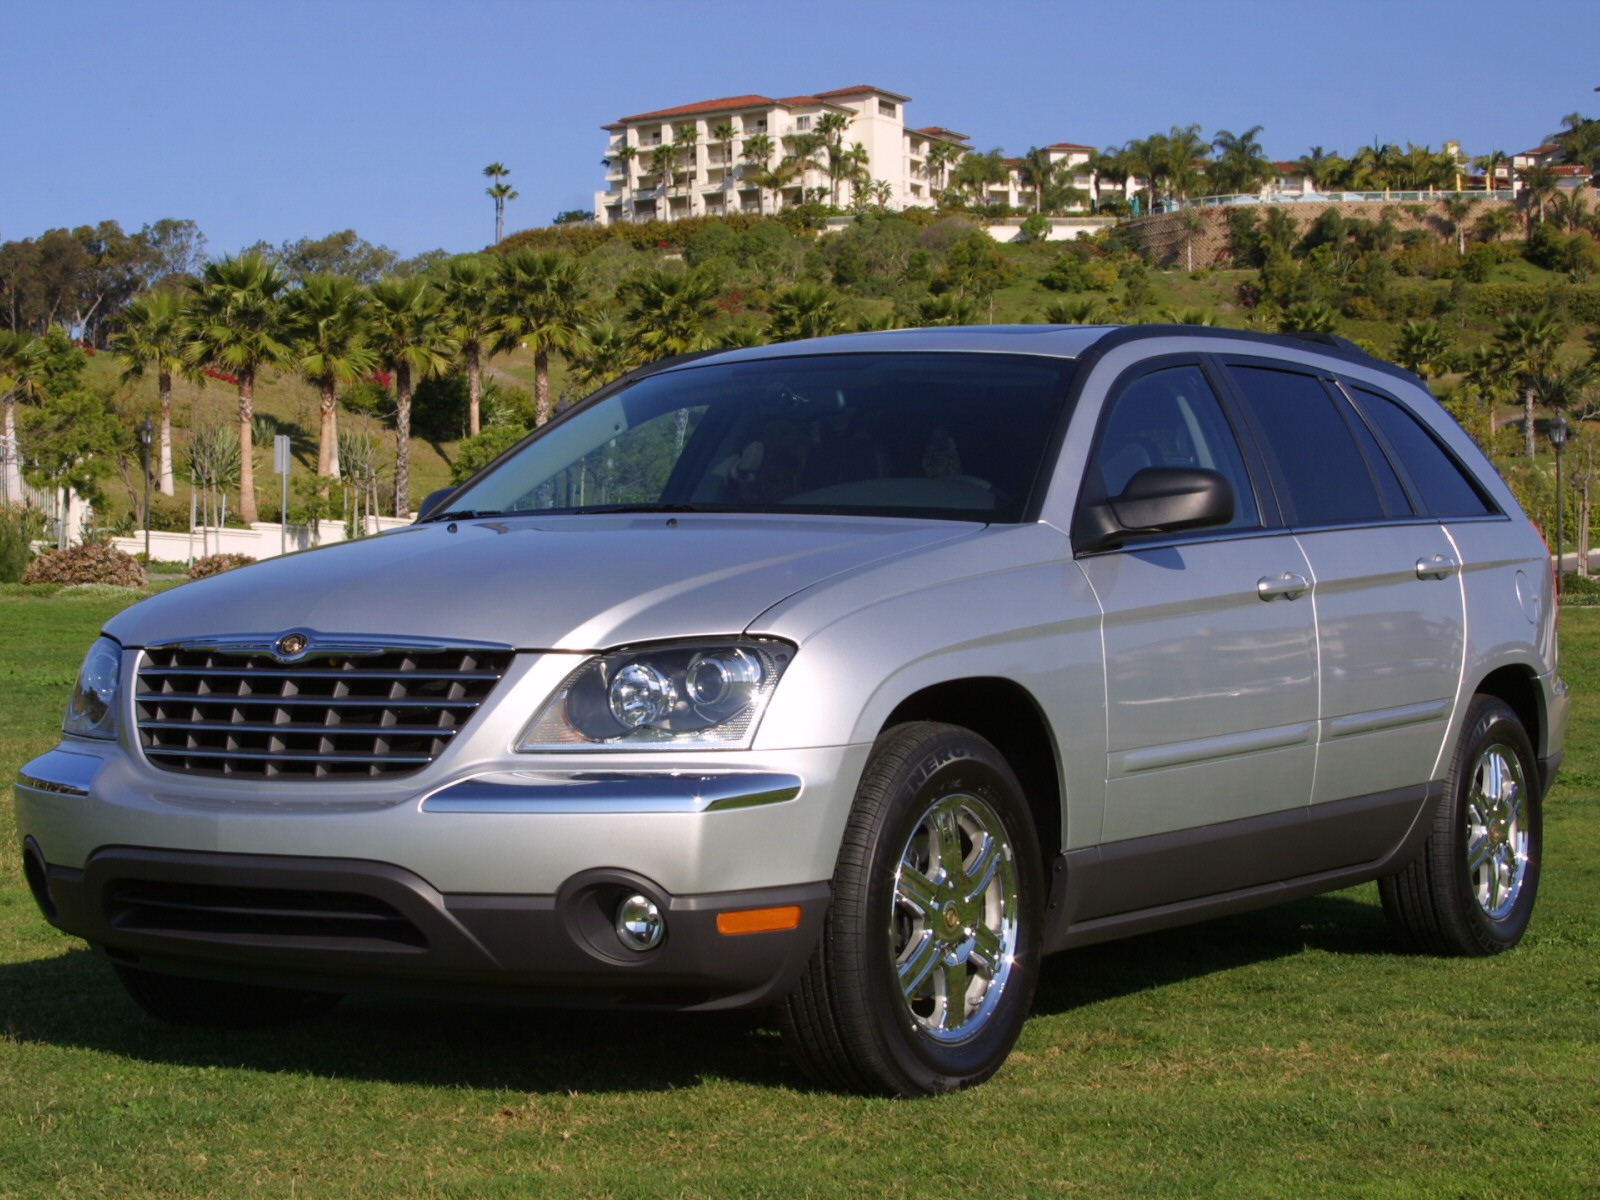 Car in pictures car photo gallery » Chrysler Pacifica